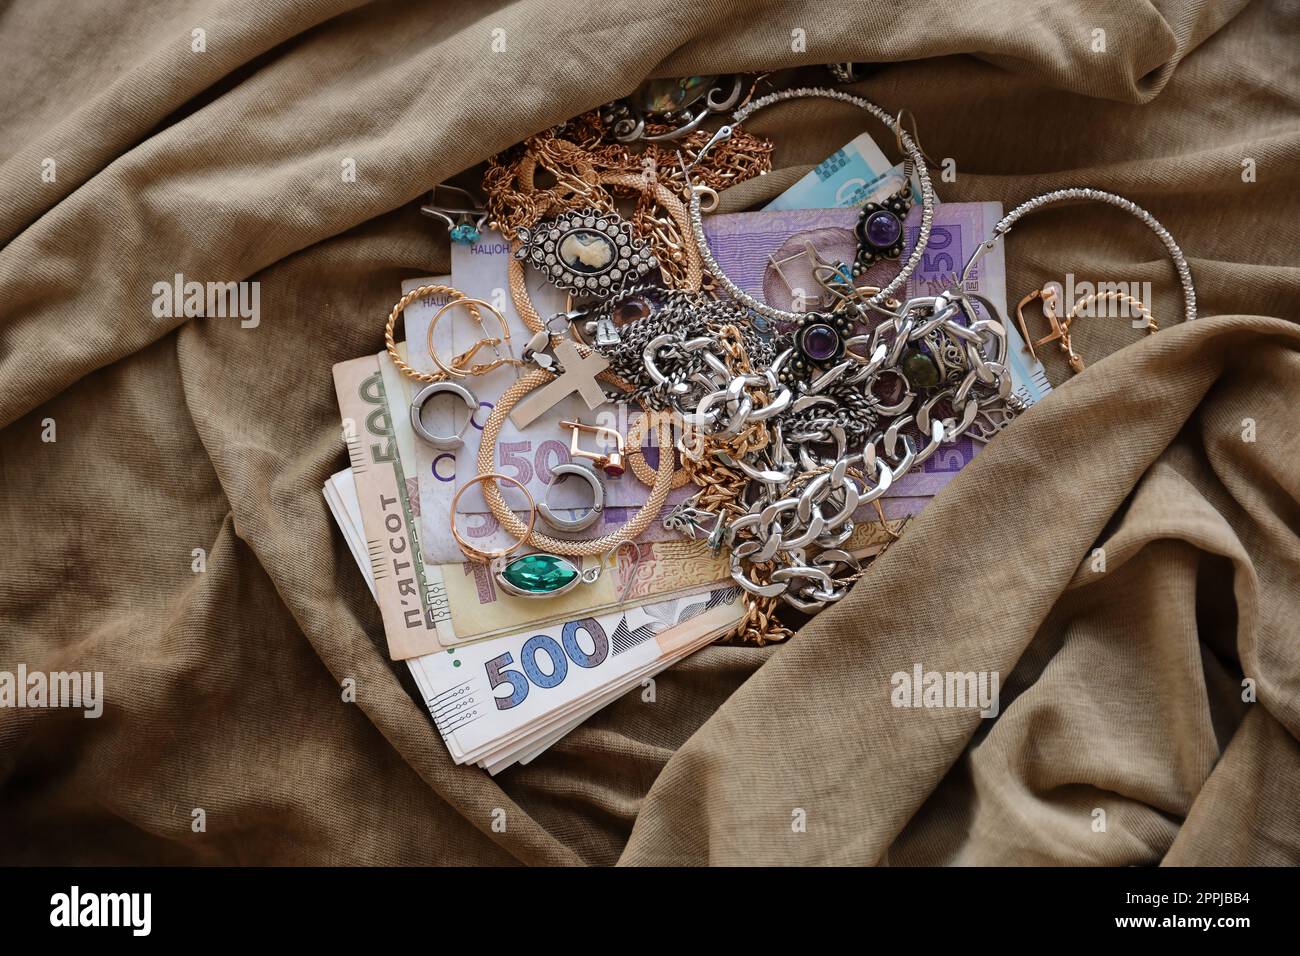 Bunch of stolen jewelry and money on military uniform cloth fabric. Looting by Russian soldiers in the Ukrainian cities during the Russian attack on Ukraine. Marauders and looters Stock Photo